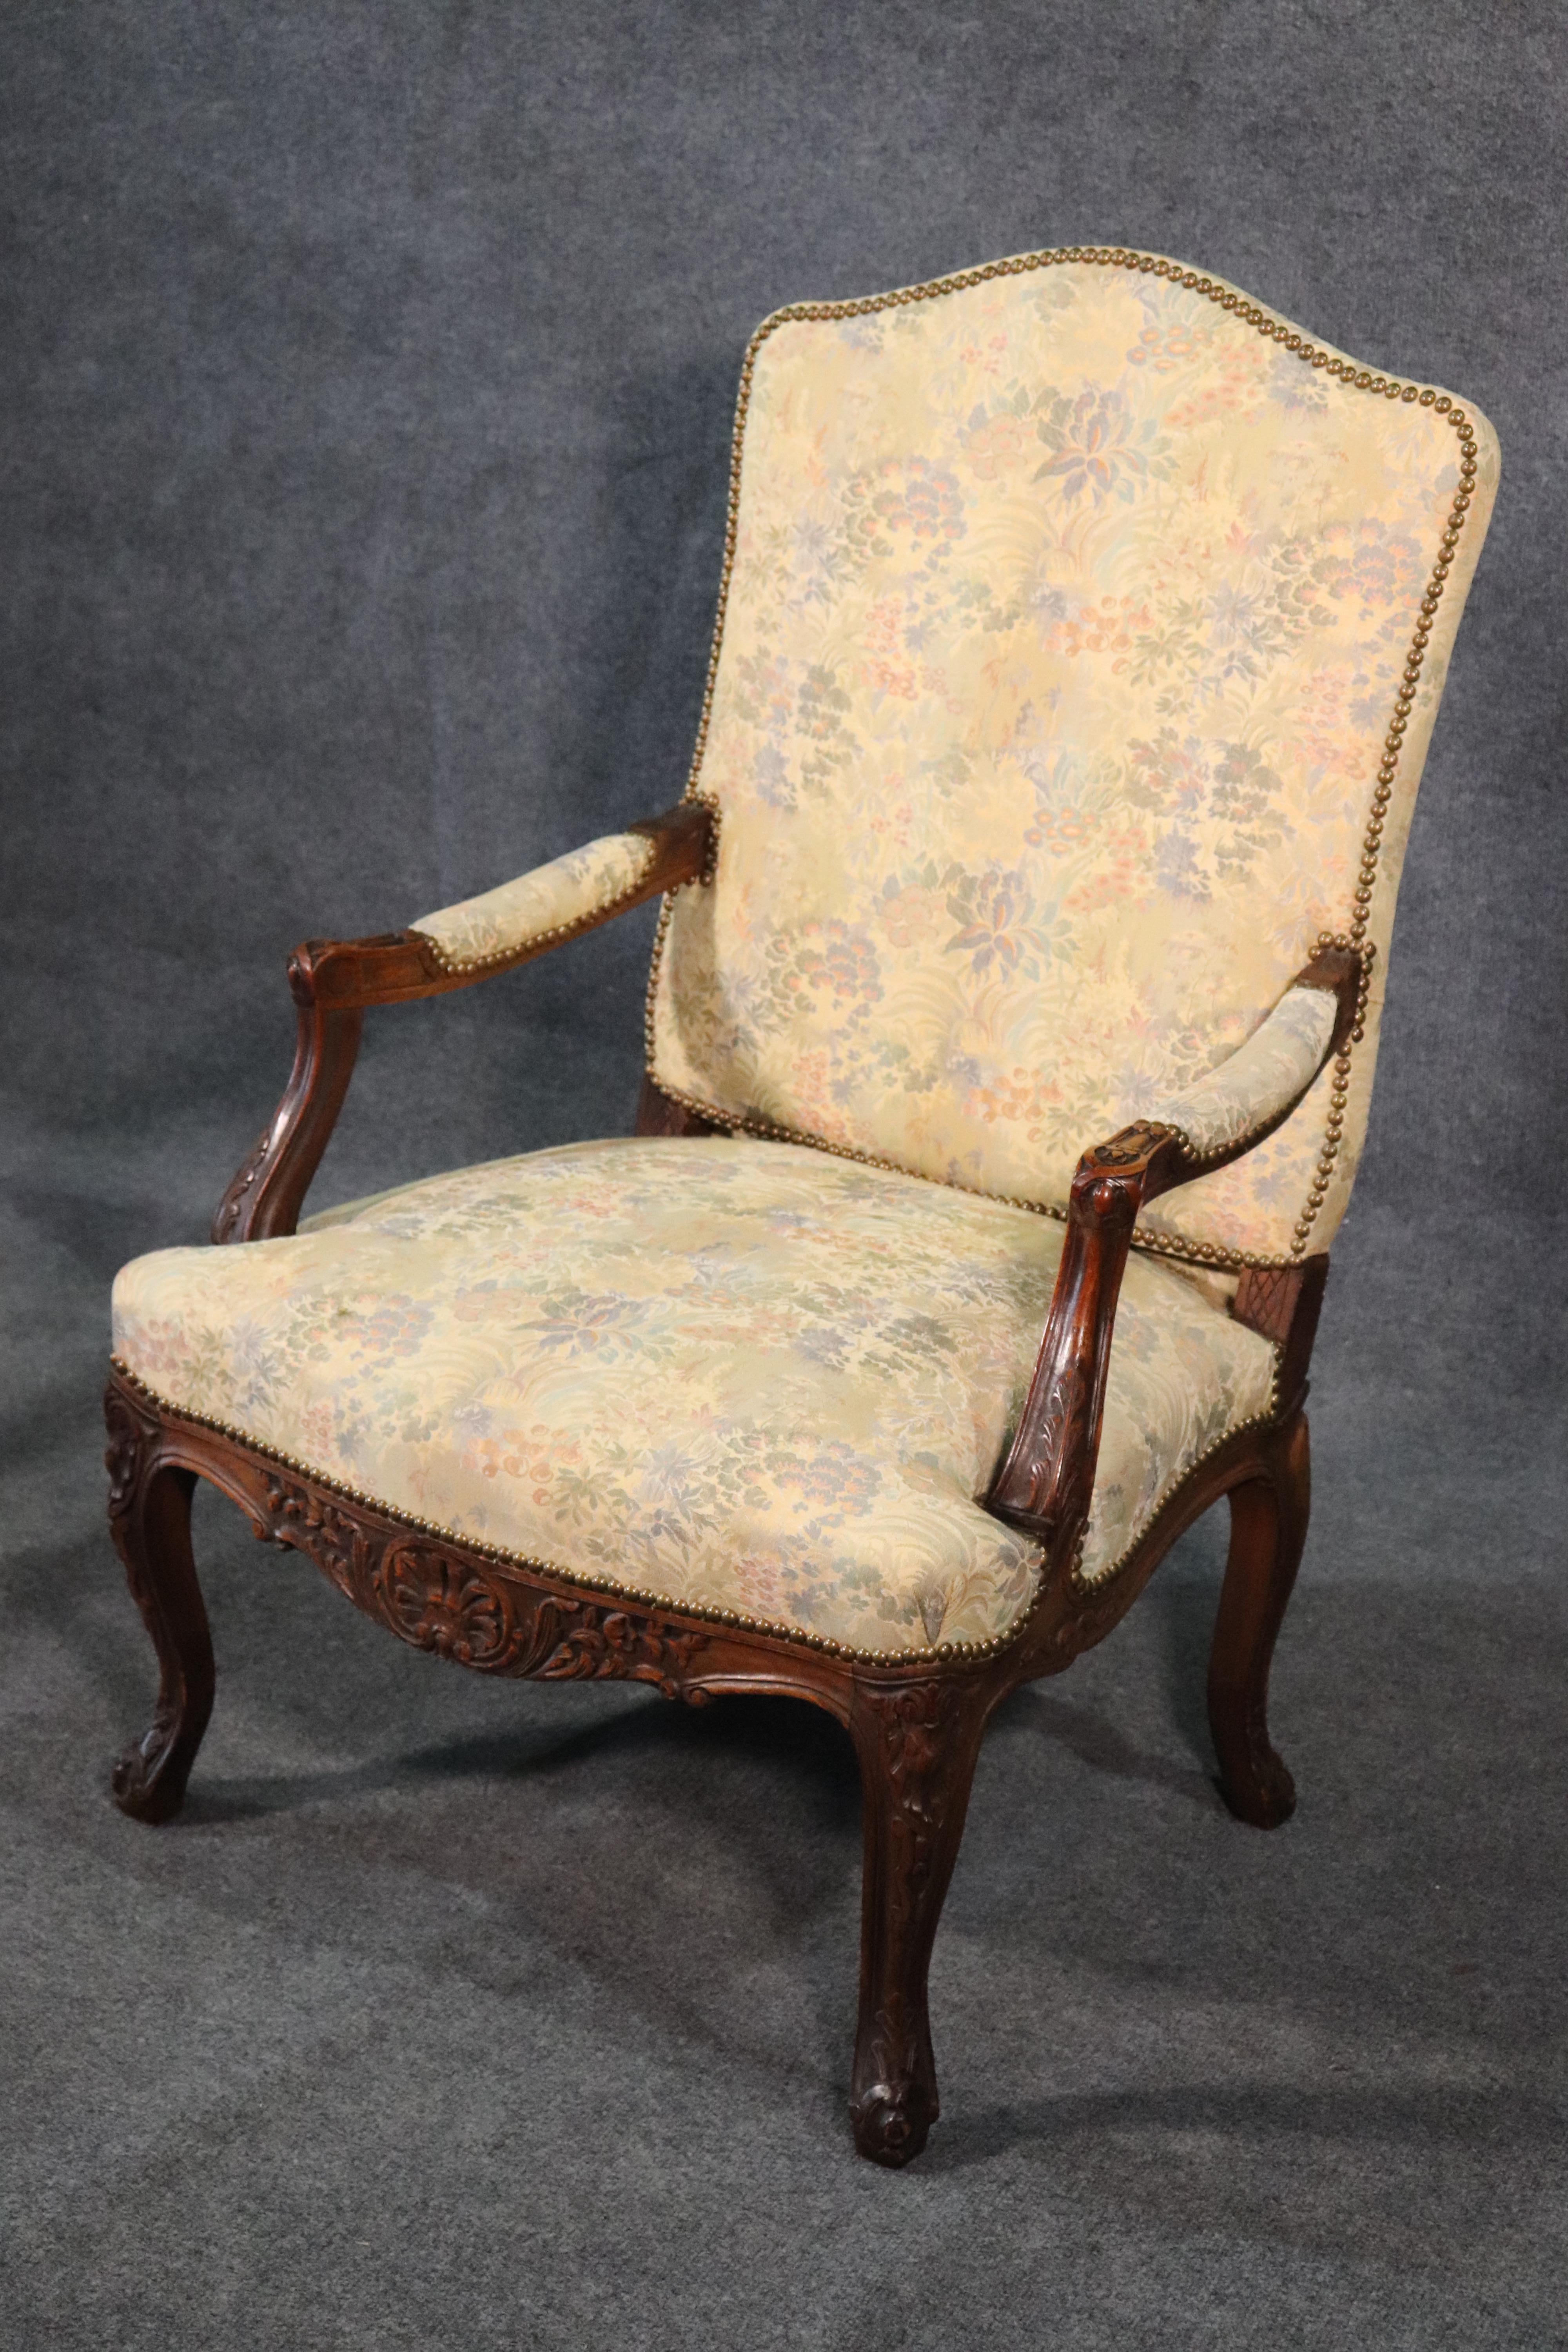 This is a Fine quality English 1930s era armchair designed in the Georgian manner. The chair is in very good condition and has fine machine tapestry upholstery and nailhead trim. The chair measures
42 tall x 28 wide x 27 deep seat height 18 tall.